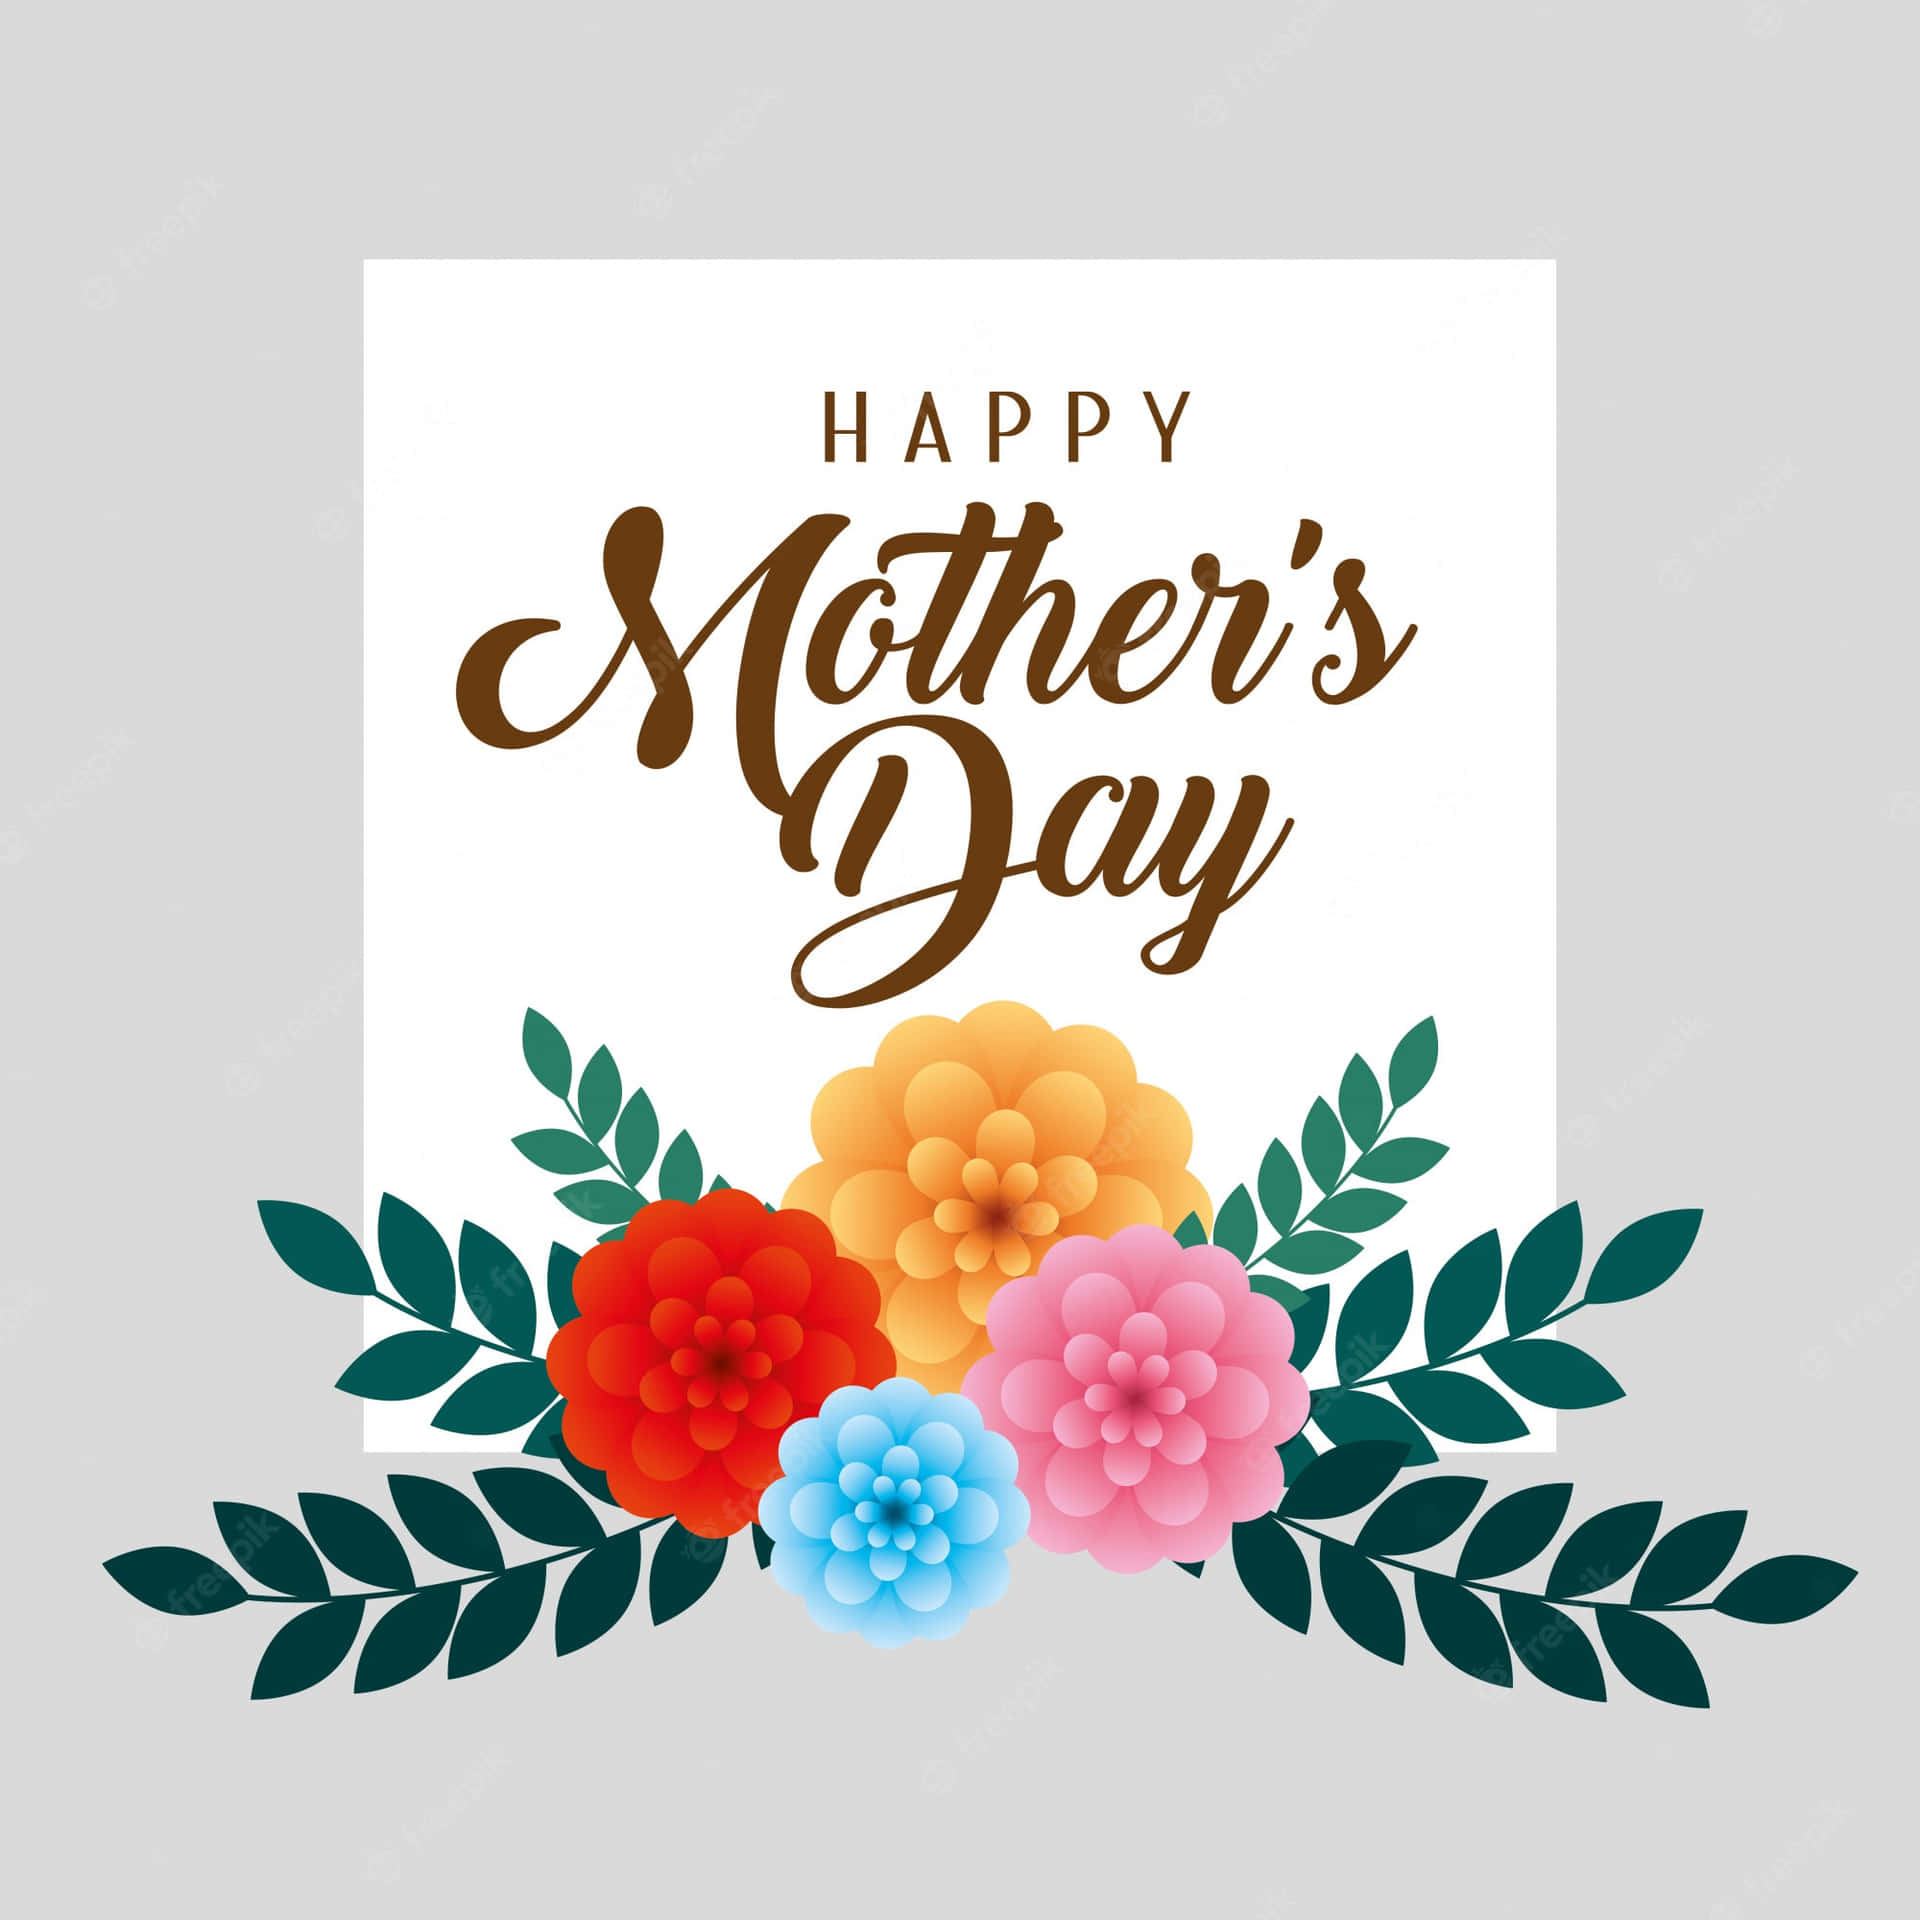 Happy Mothers Day Card With Flowers And Leaves